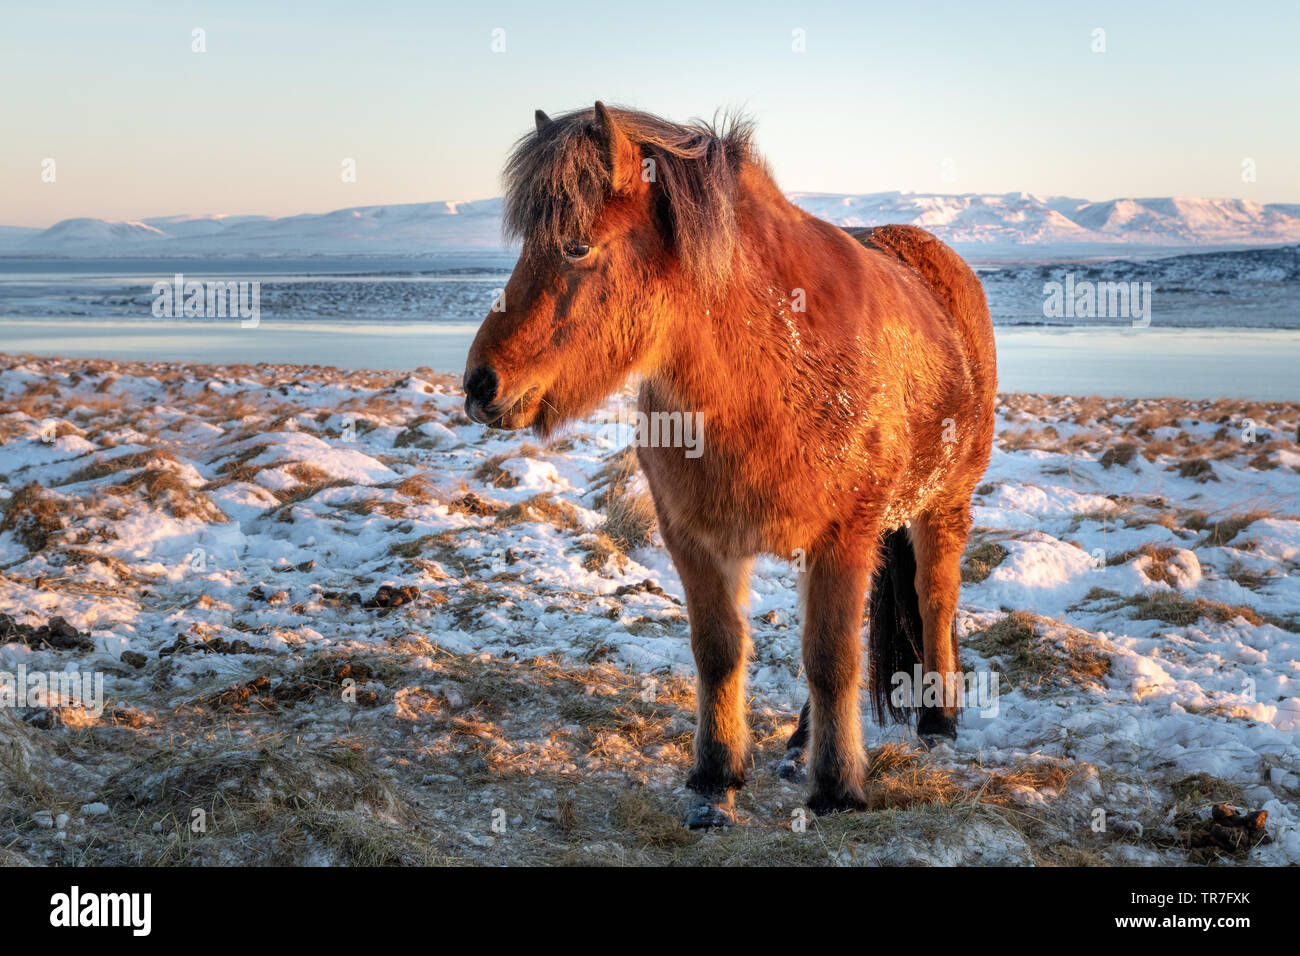 Icelandic Horse in the Snow at Sunrise Stock Photo